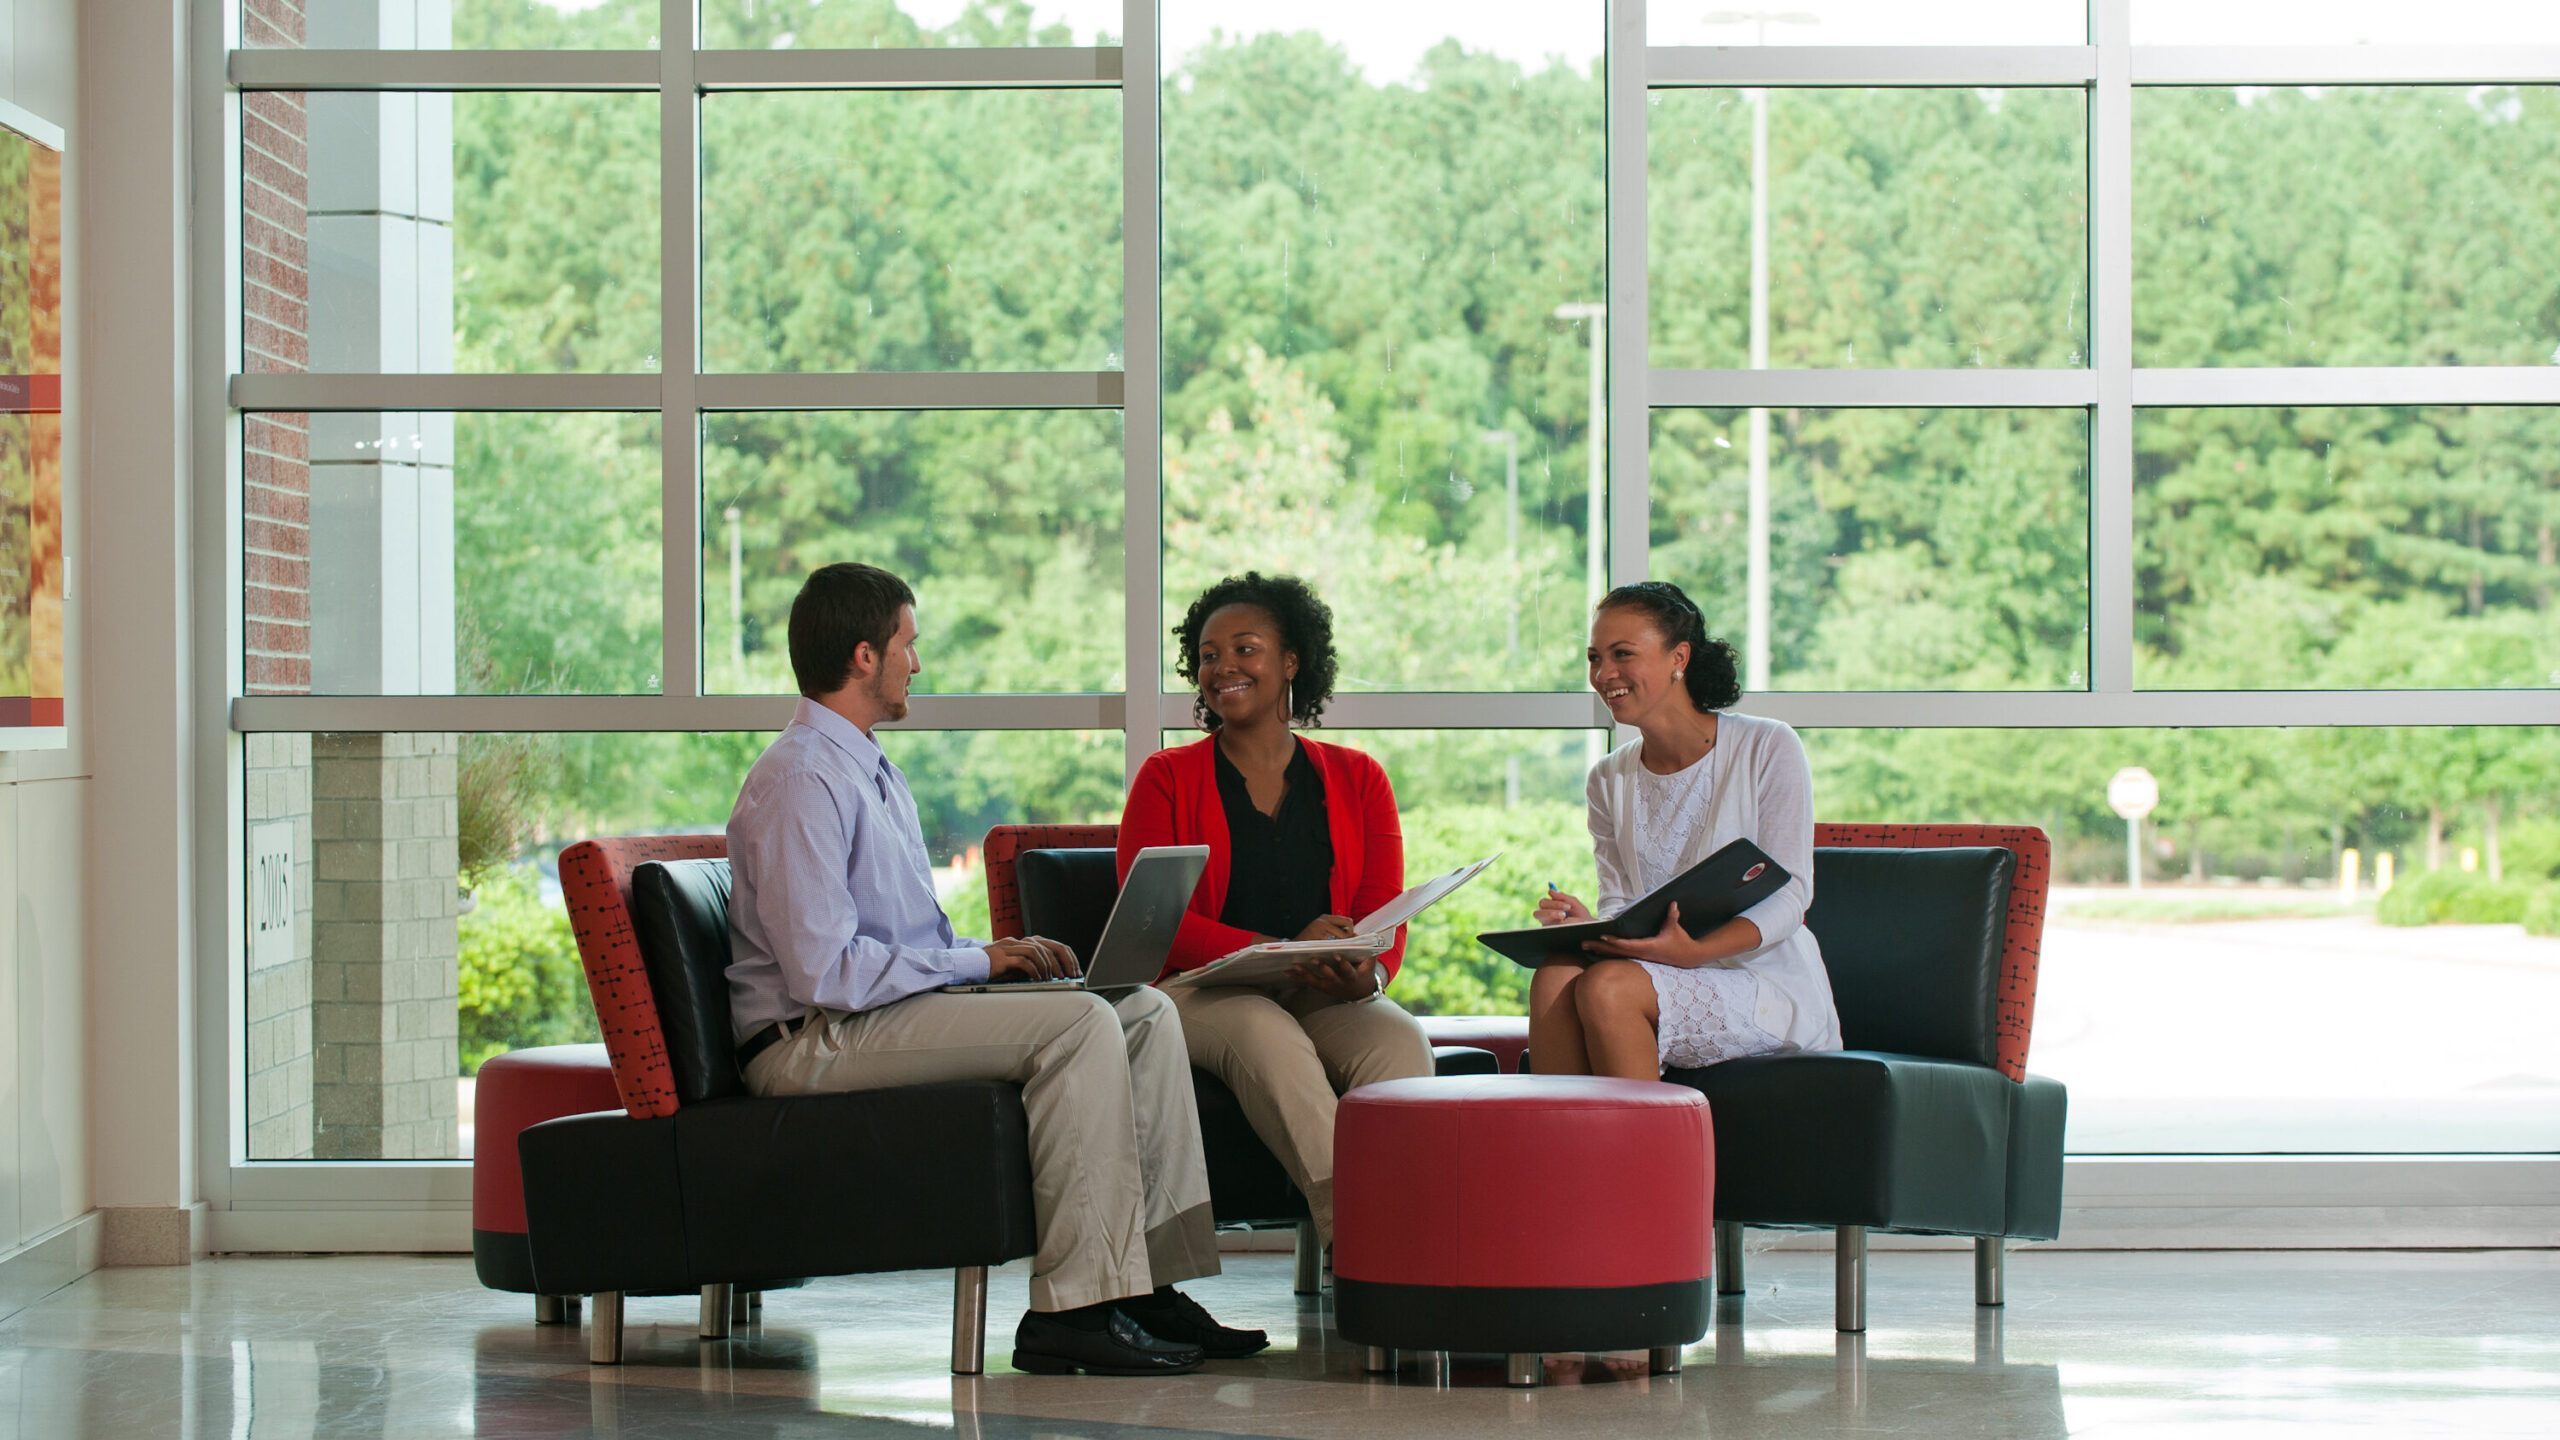 Photo of three people sitting and discussing in the lobby of a building